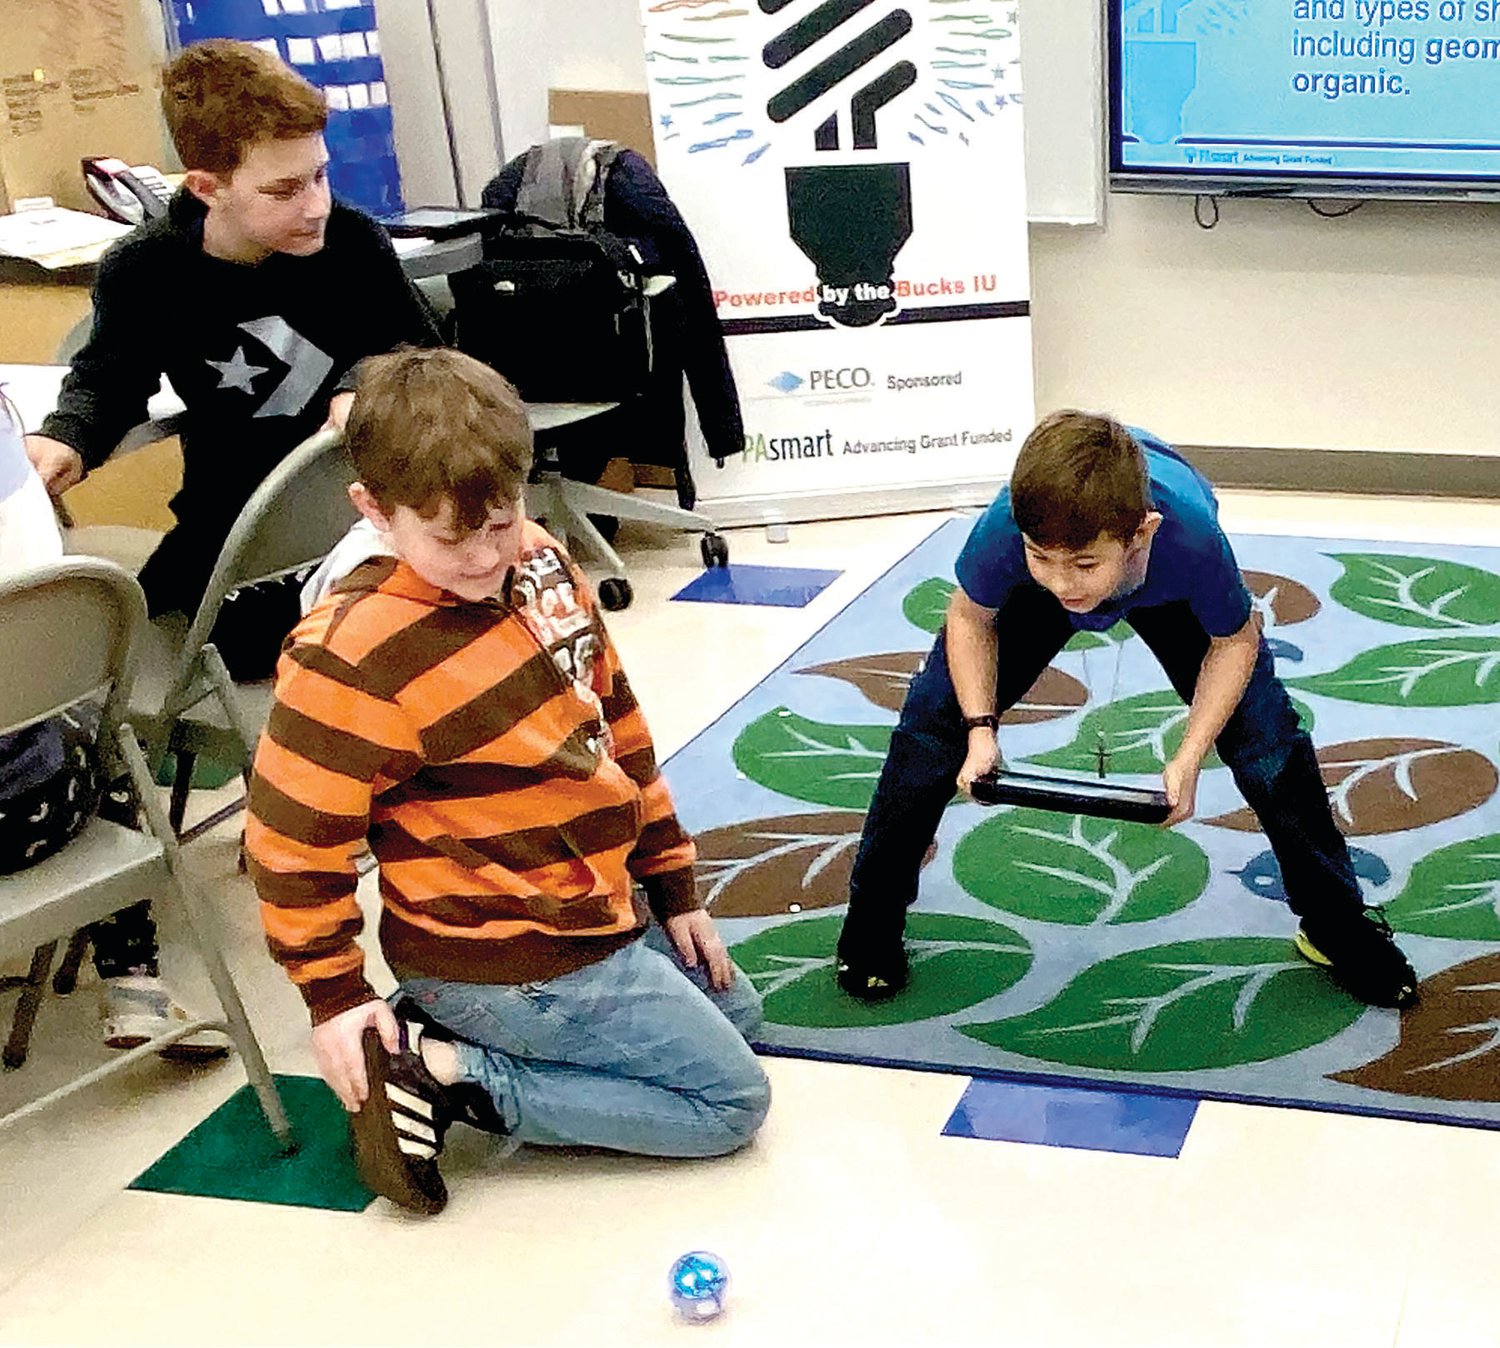 As part of their Fab Lab learning experience, Neidig fourth graders were introduced to Sphero, a spherical robot programmed to roll around and perform different functions using an iPAD App.